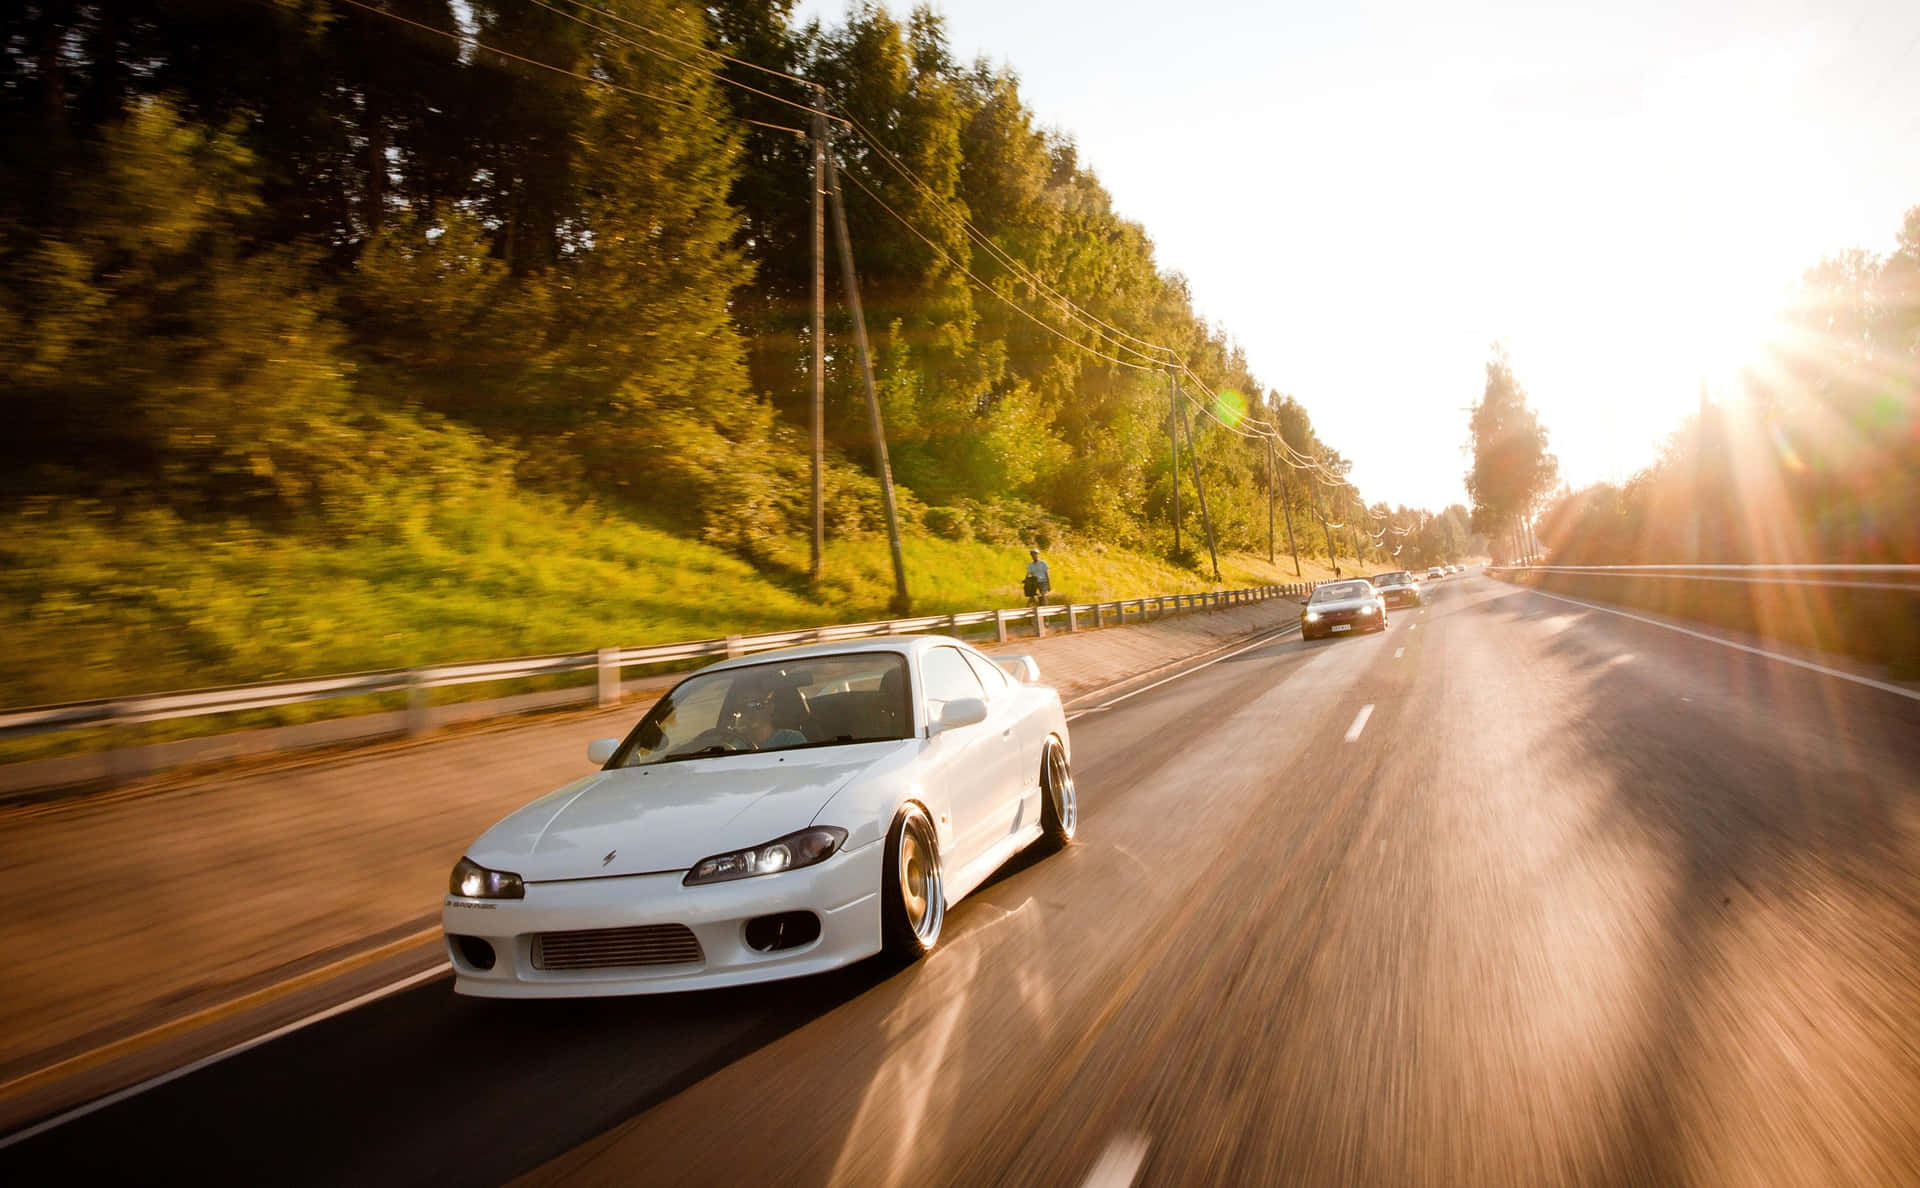 The Iconic Nissan Silvia S15 Wallpaper